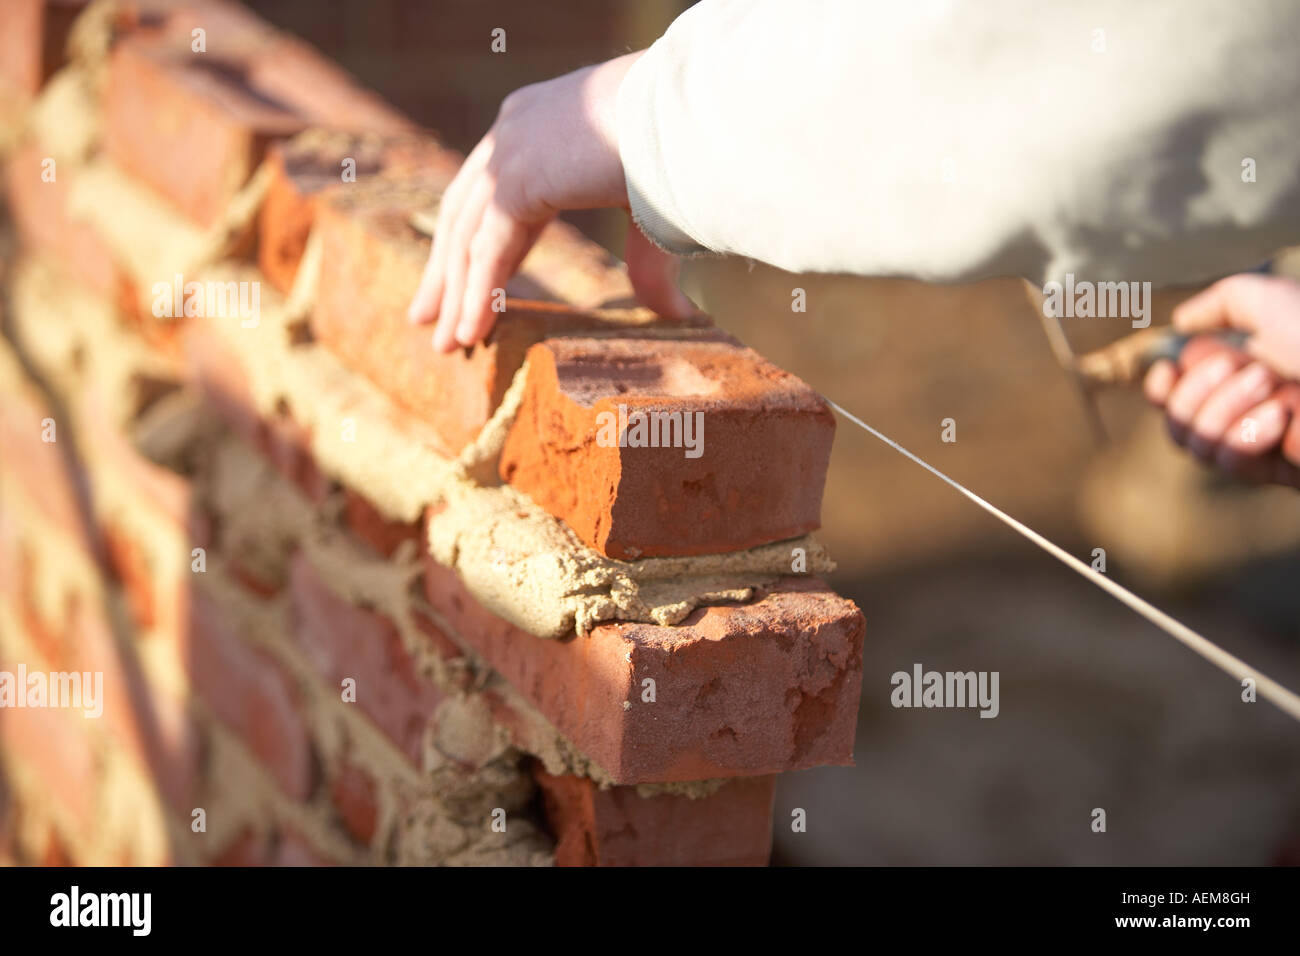 WORKER  LAYING BRICKS WITH MORTER ON A CONSTRUCTION SITE IN THE UK, BUILDING A HOUSE Stock Photo